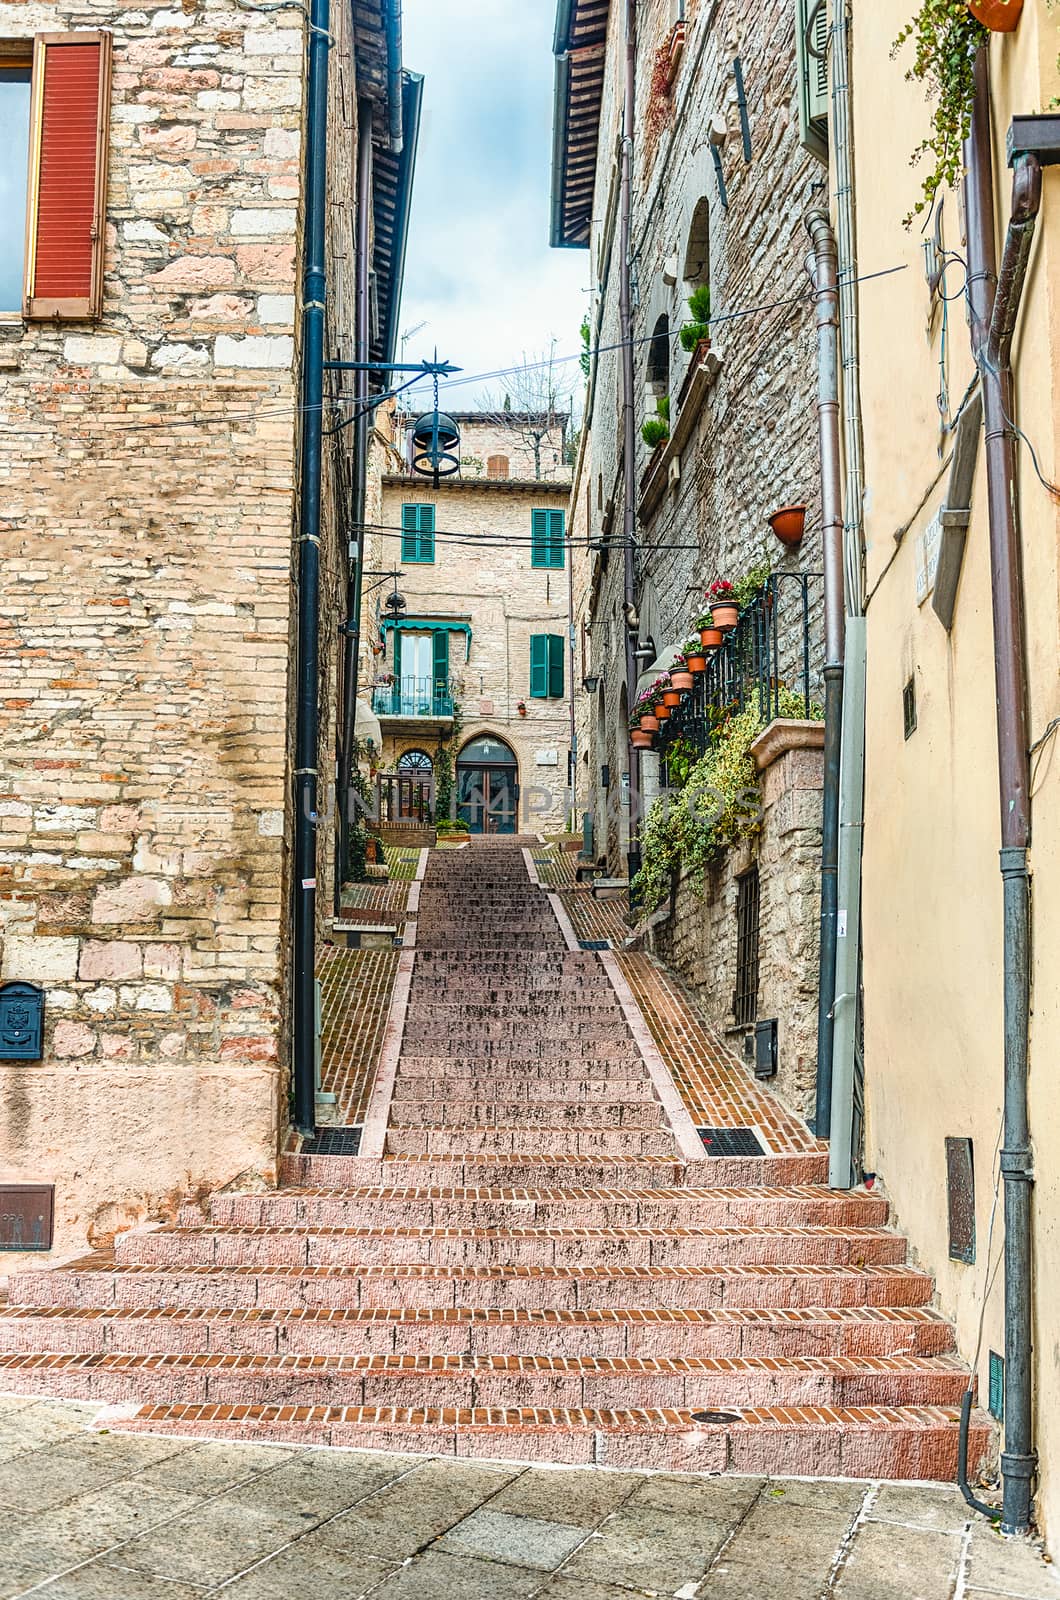 Scenic streets of the medieval town of Assisi, Umbria, Italy by marcorubino